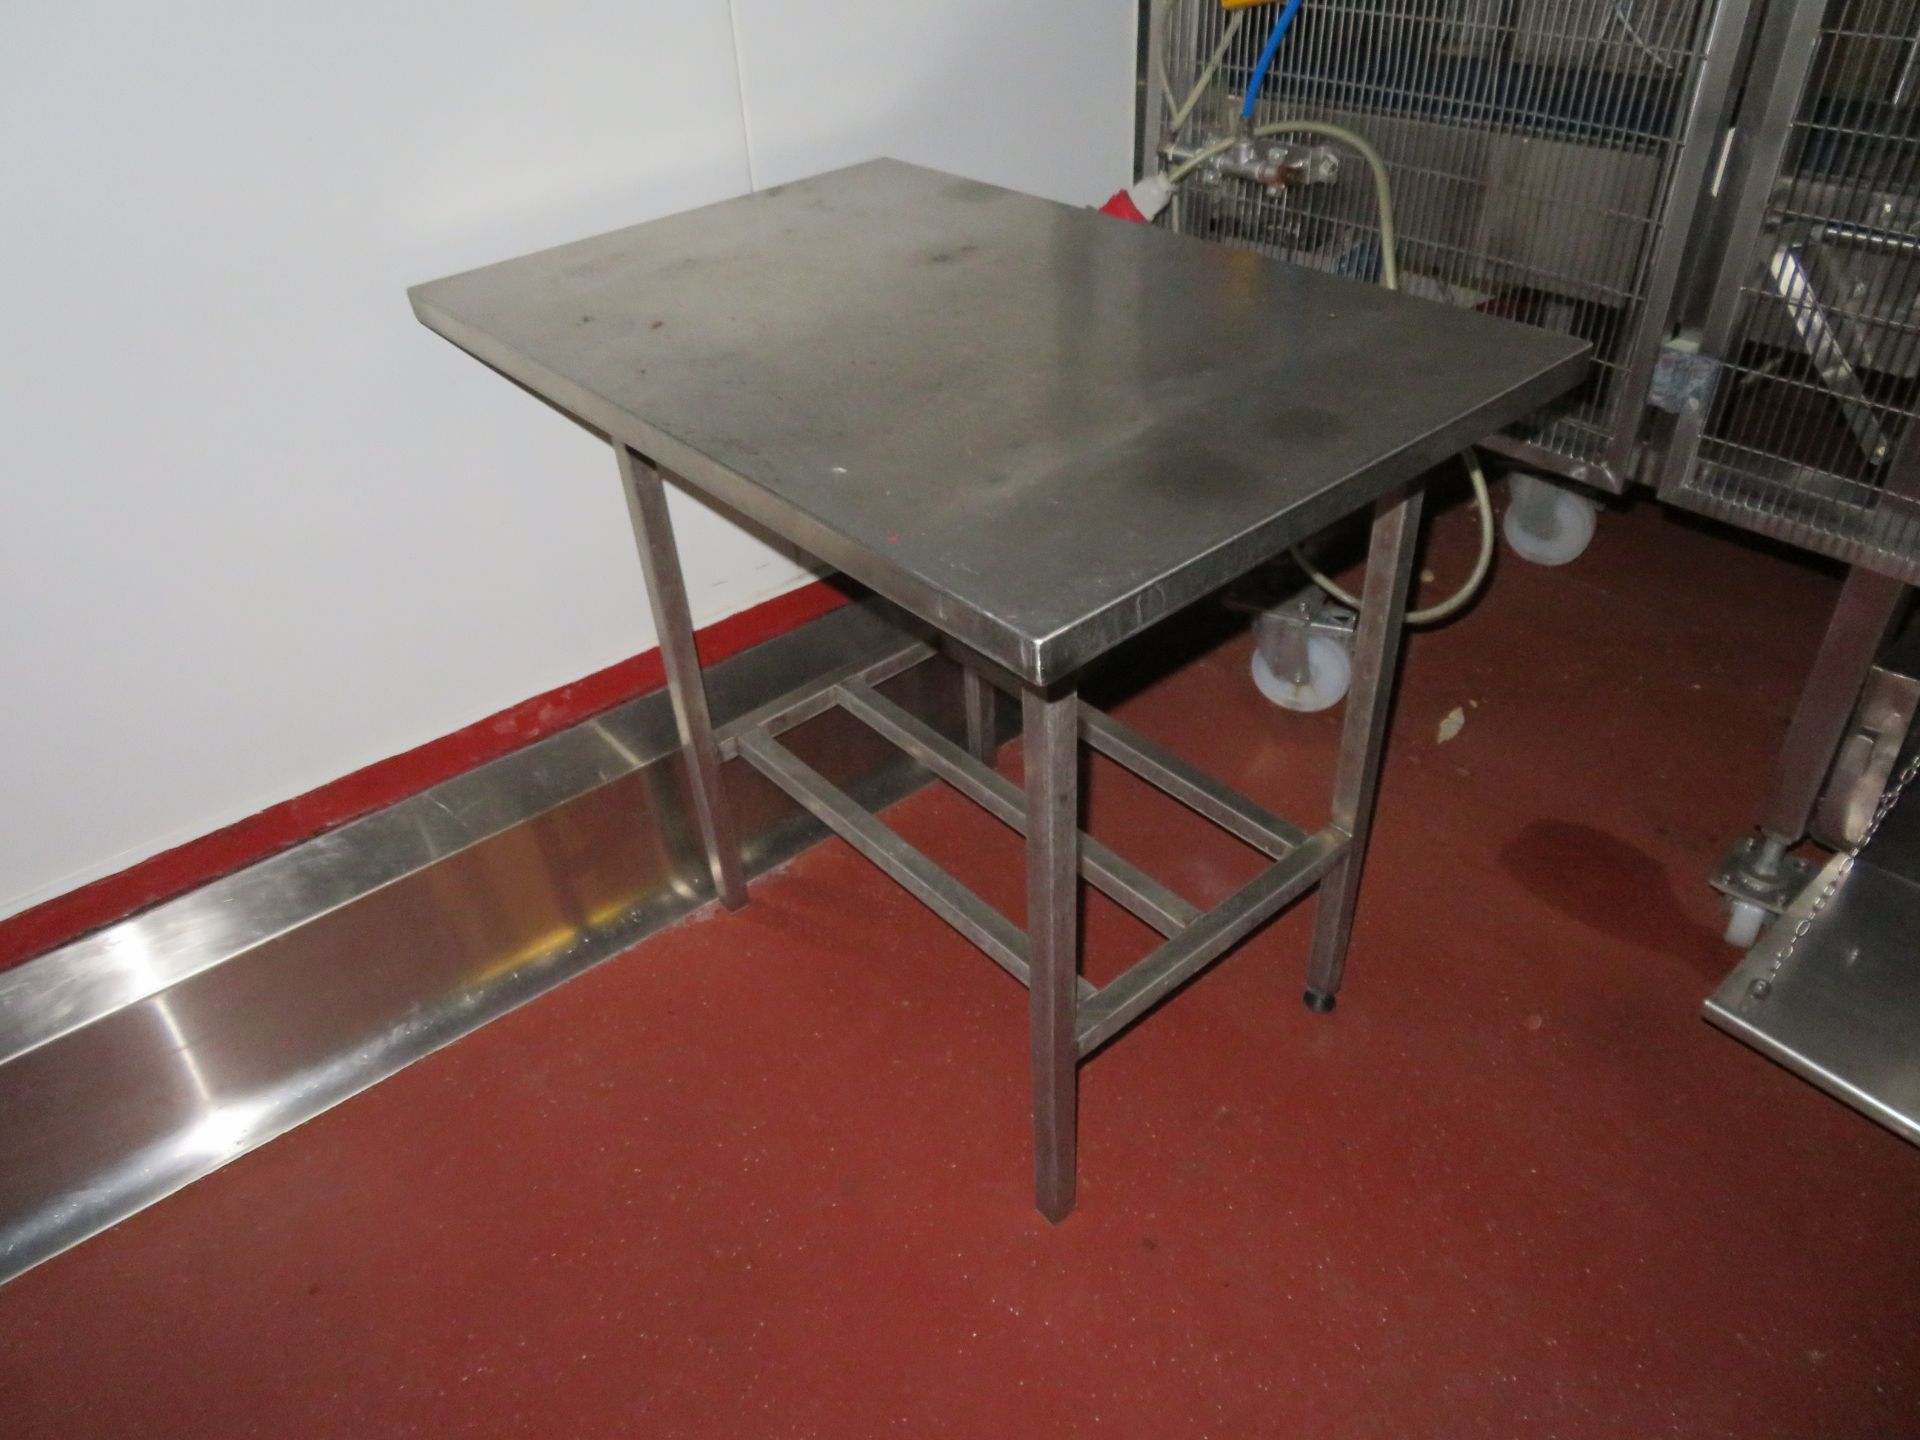 3 x SS preparation benches, 1 x SS mobile trolley